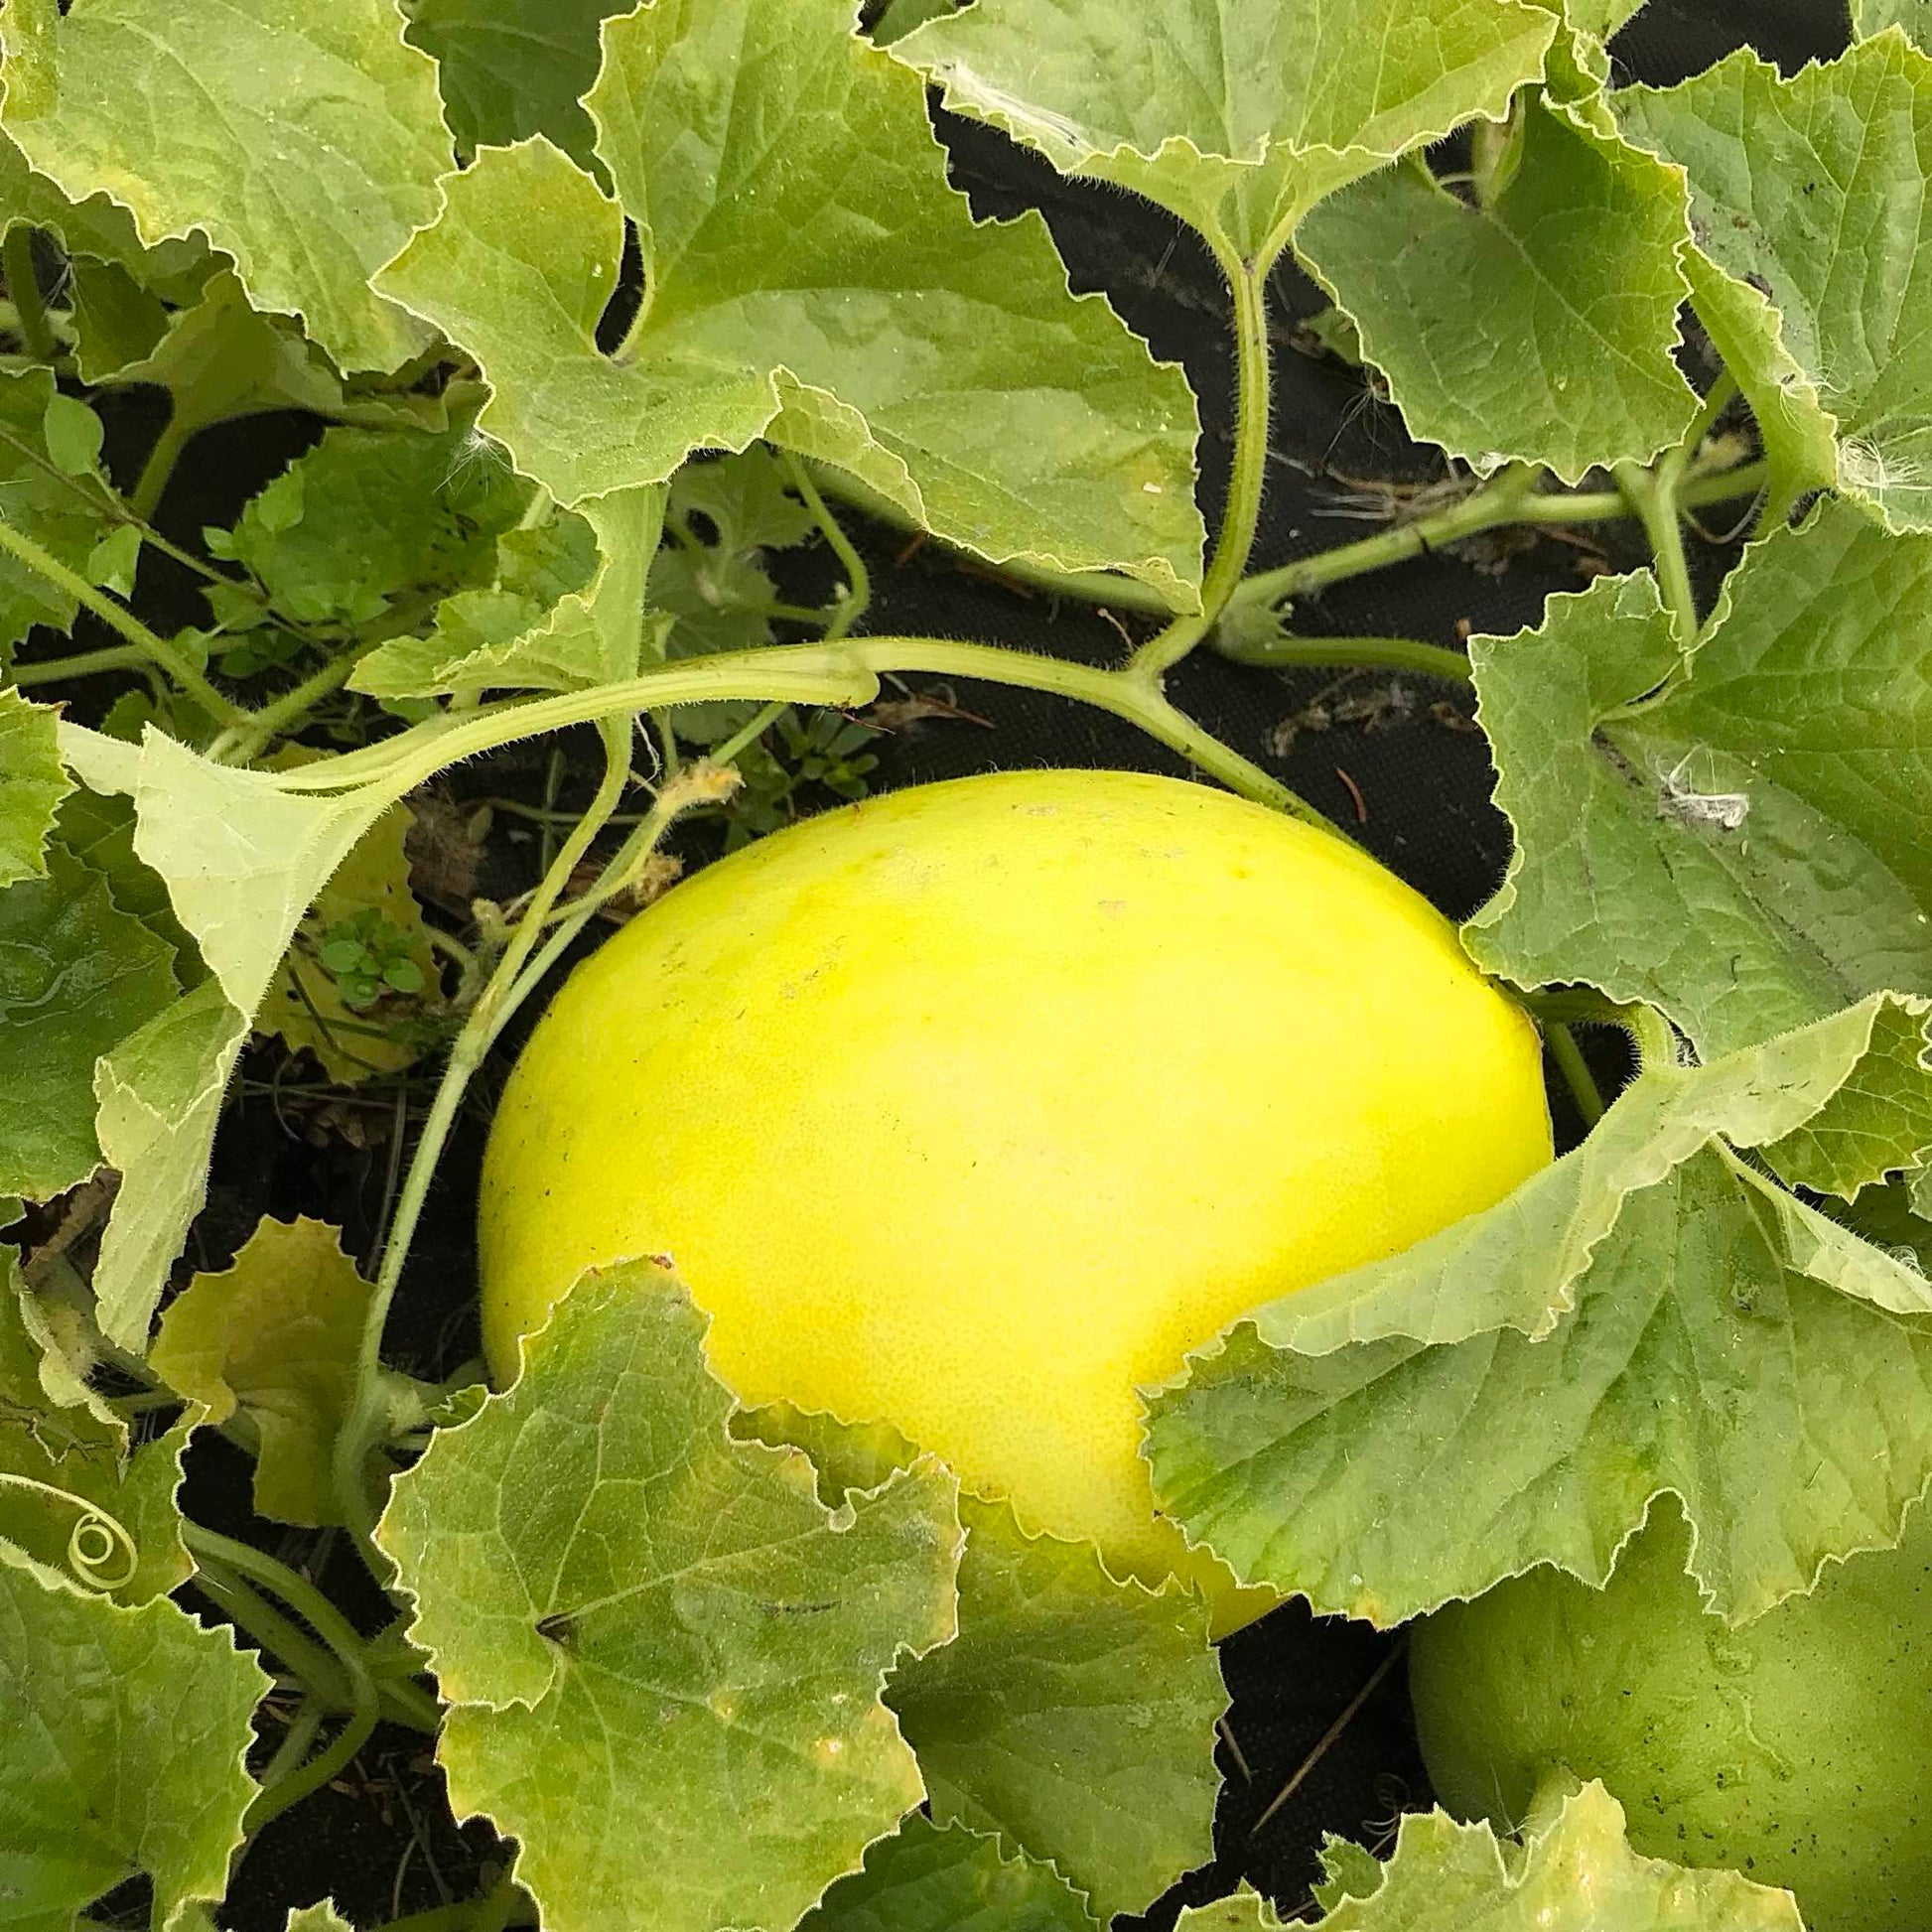 Honeydew melon nestled in vines and leaves.